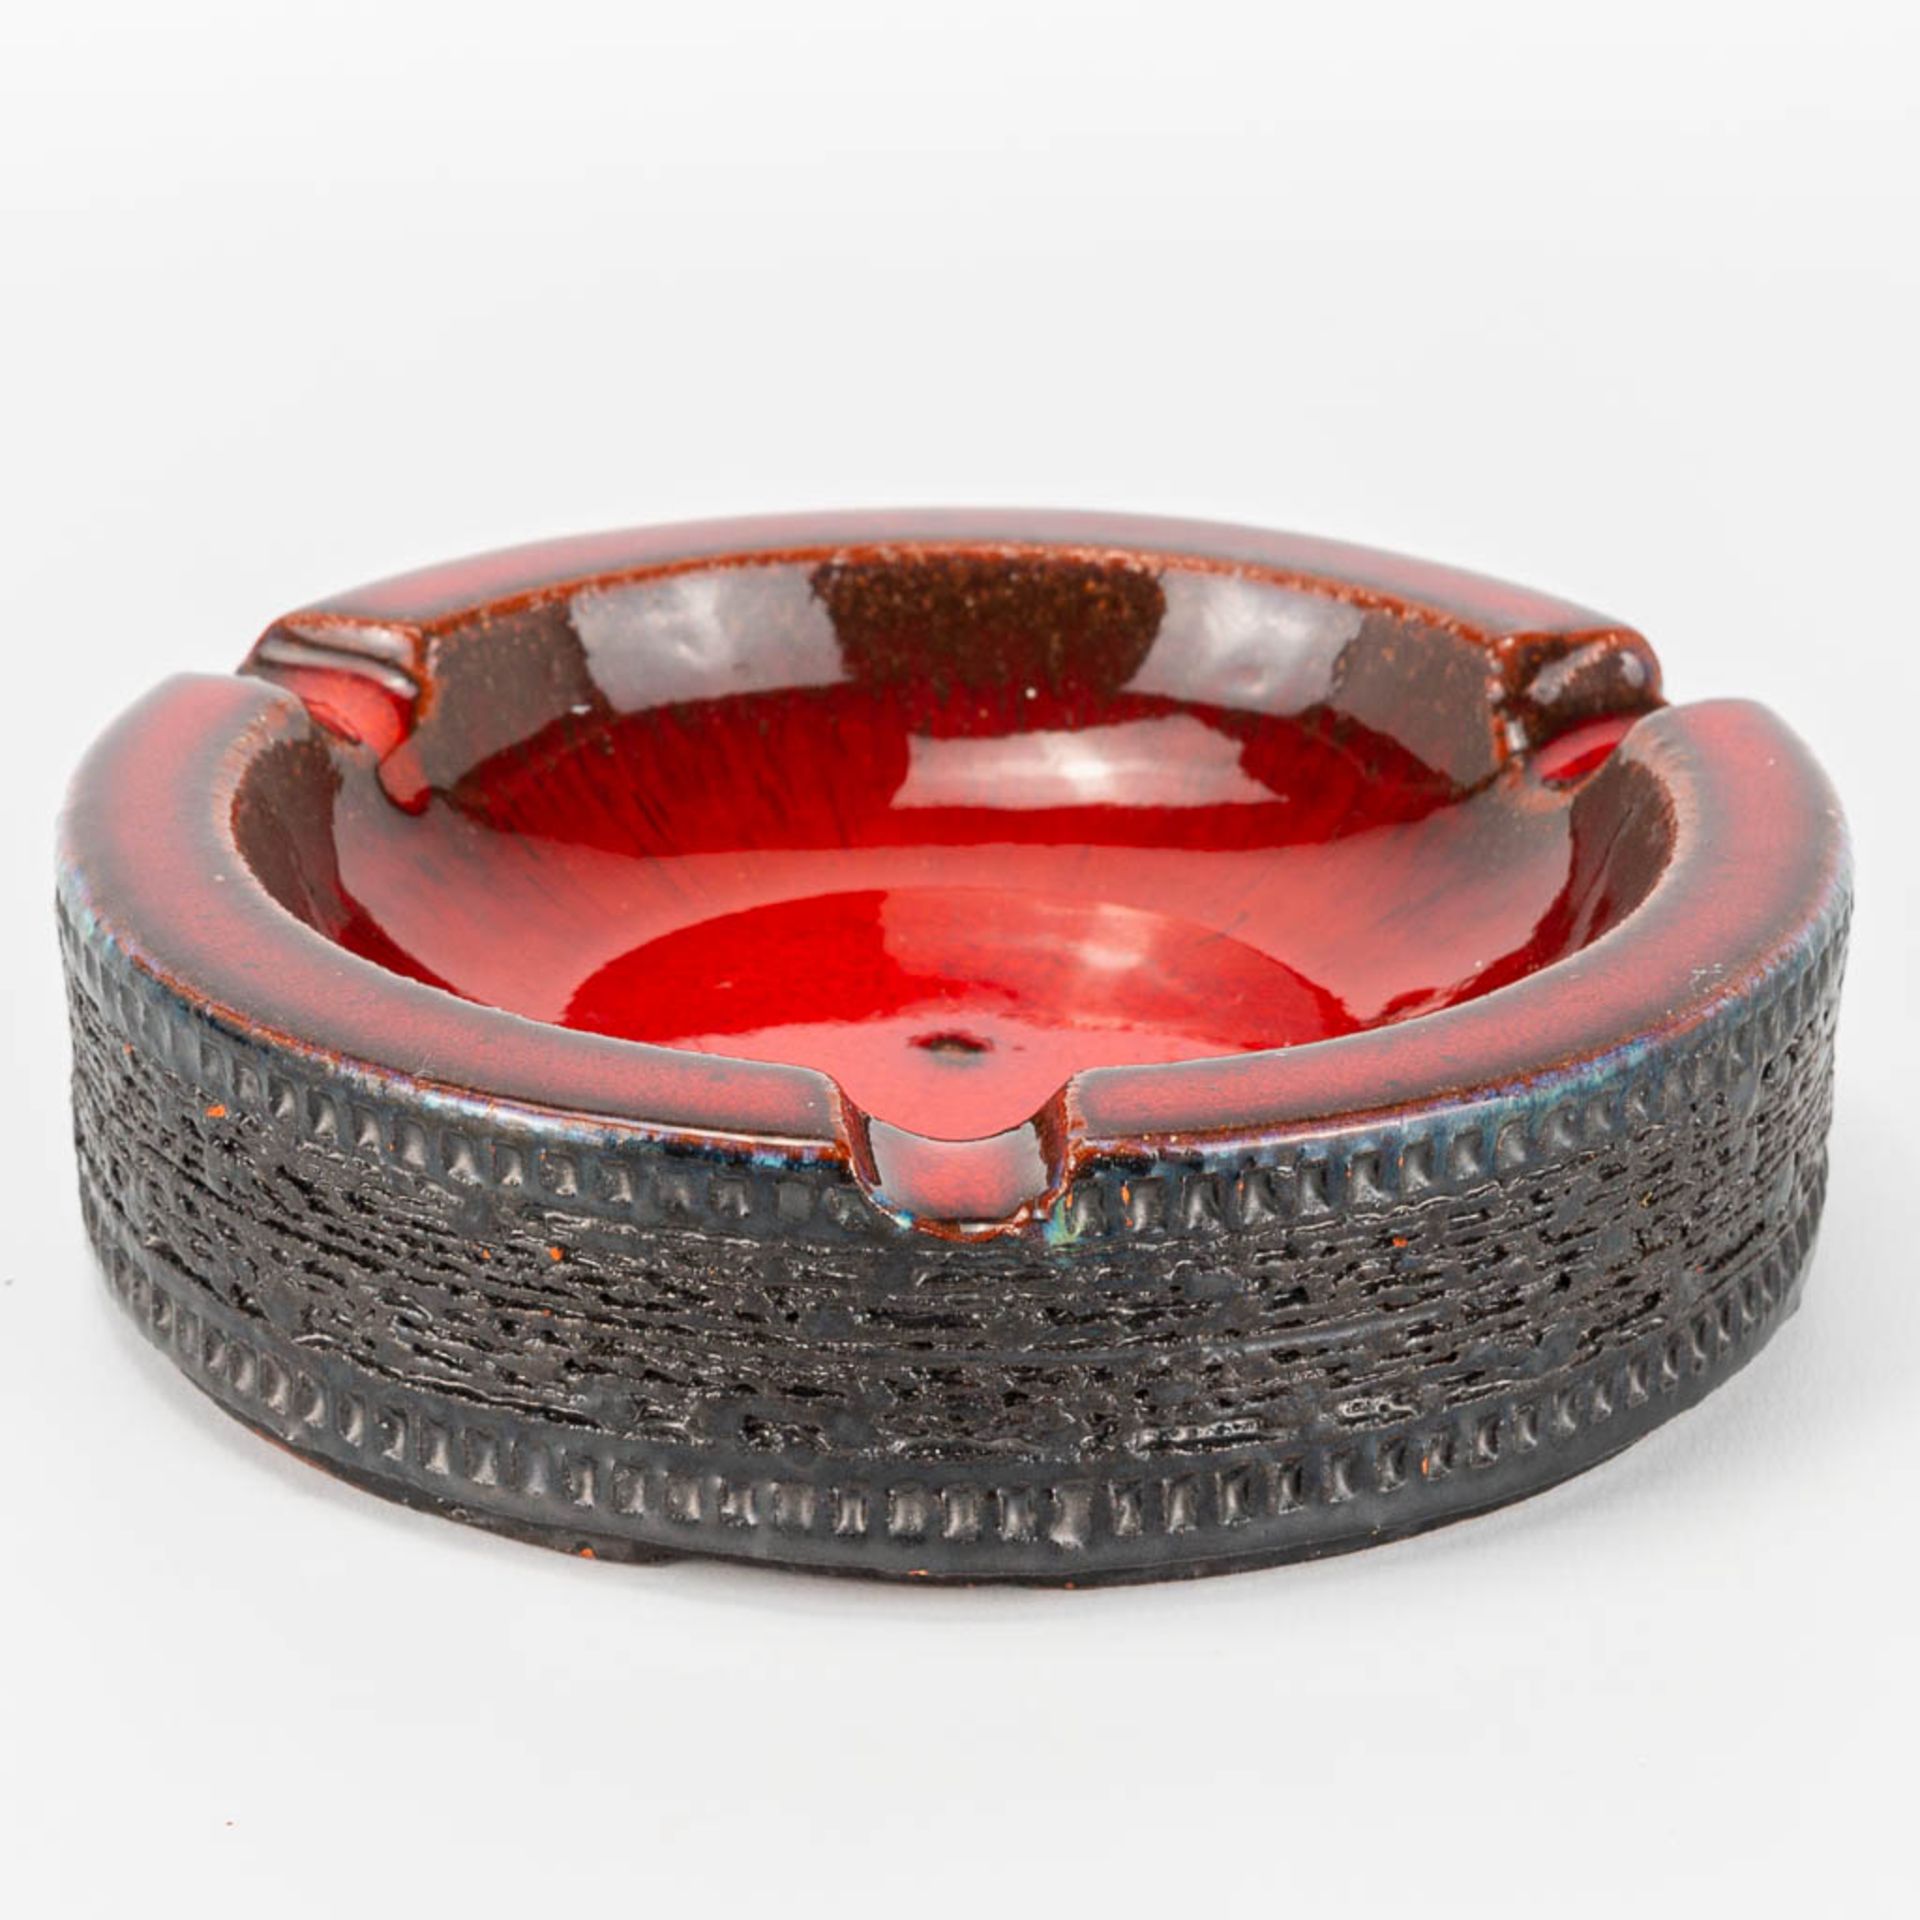 Rogier VANDEWEGHE (1923-2020) A collection of 2 ashtrays made of red glazed ceramics for Amphora. Ma - Image 9 of 19